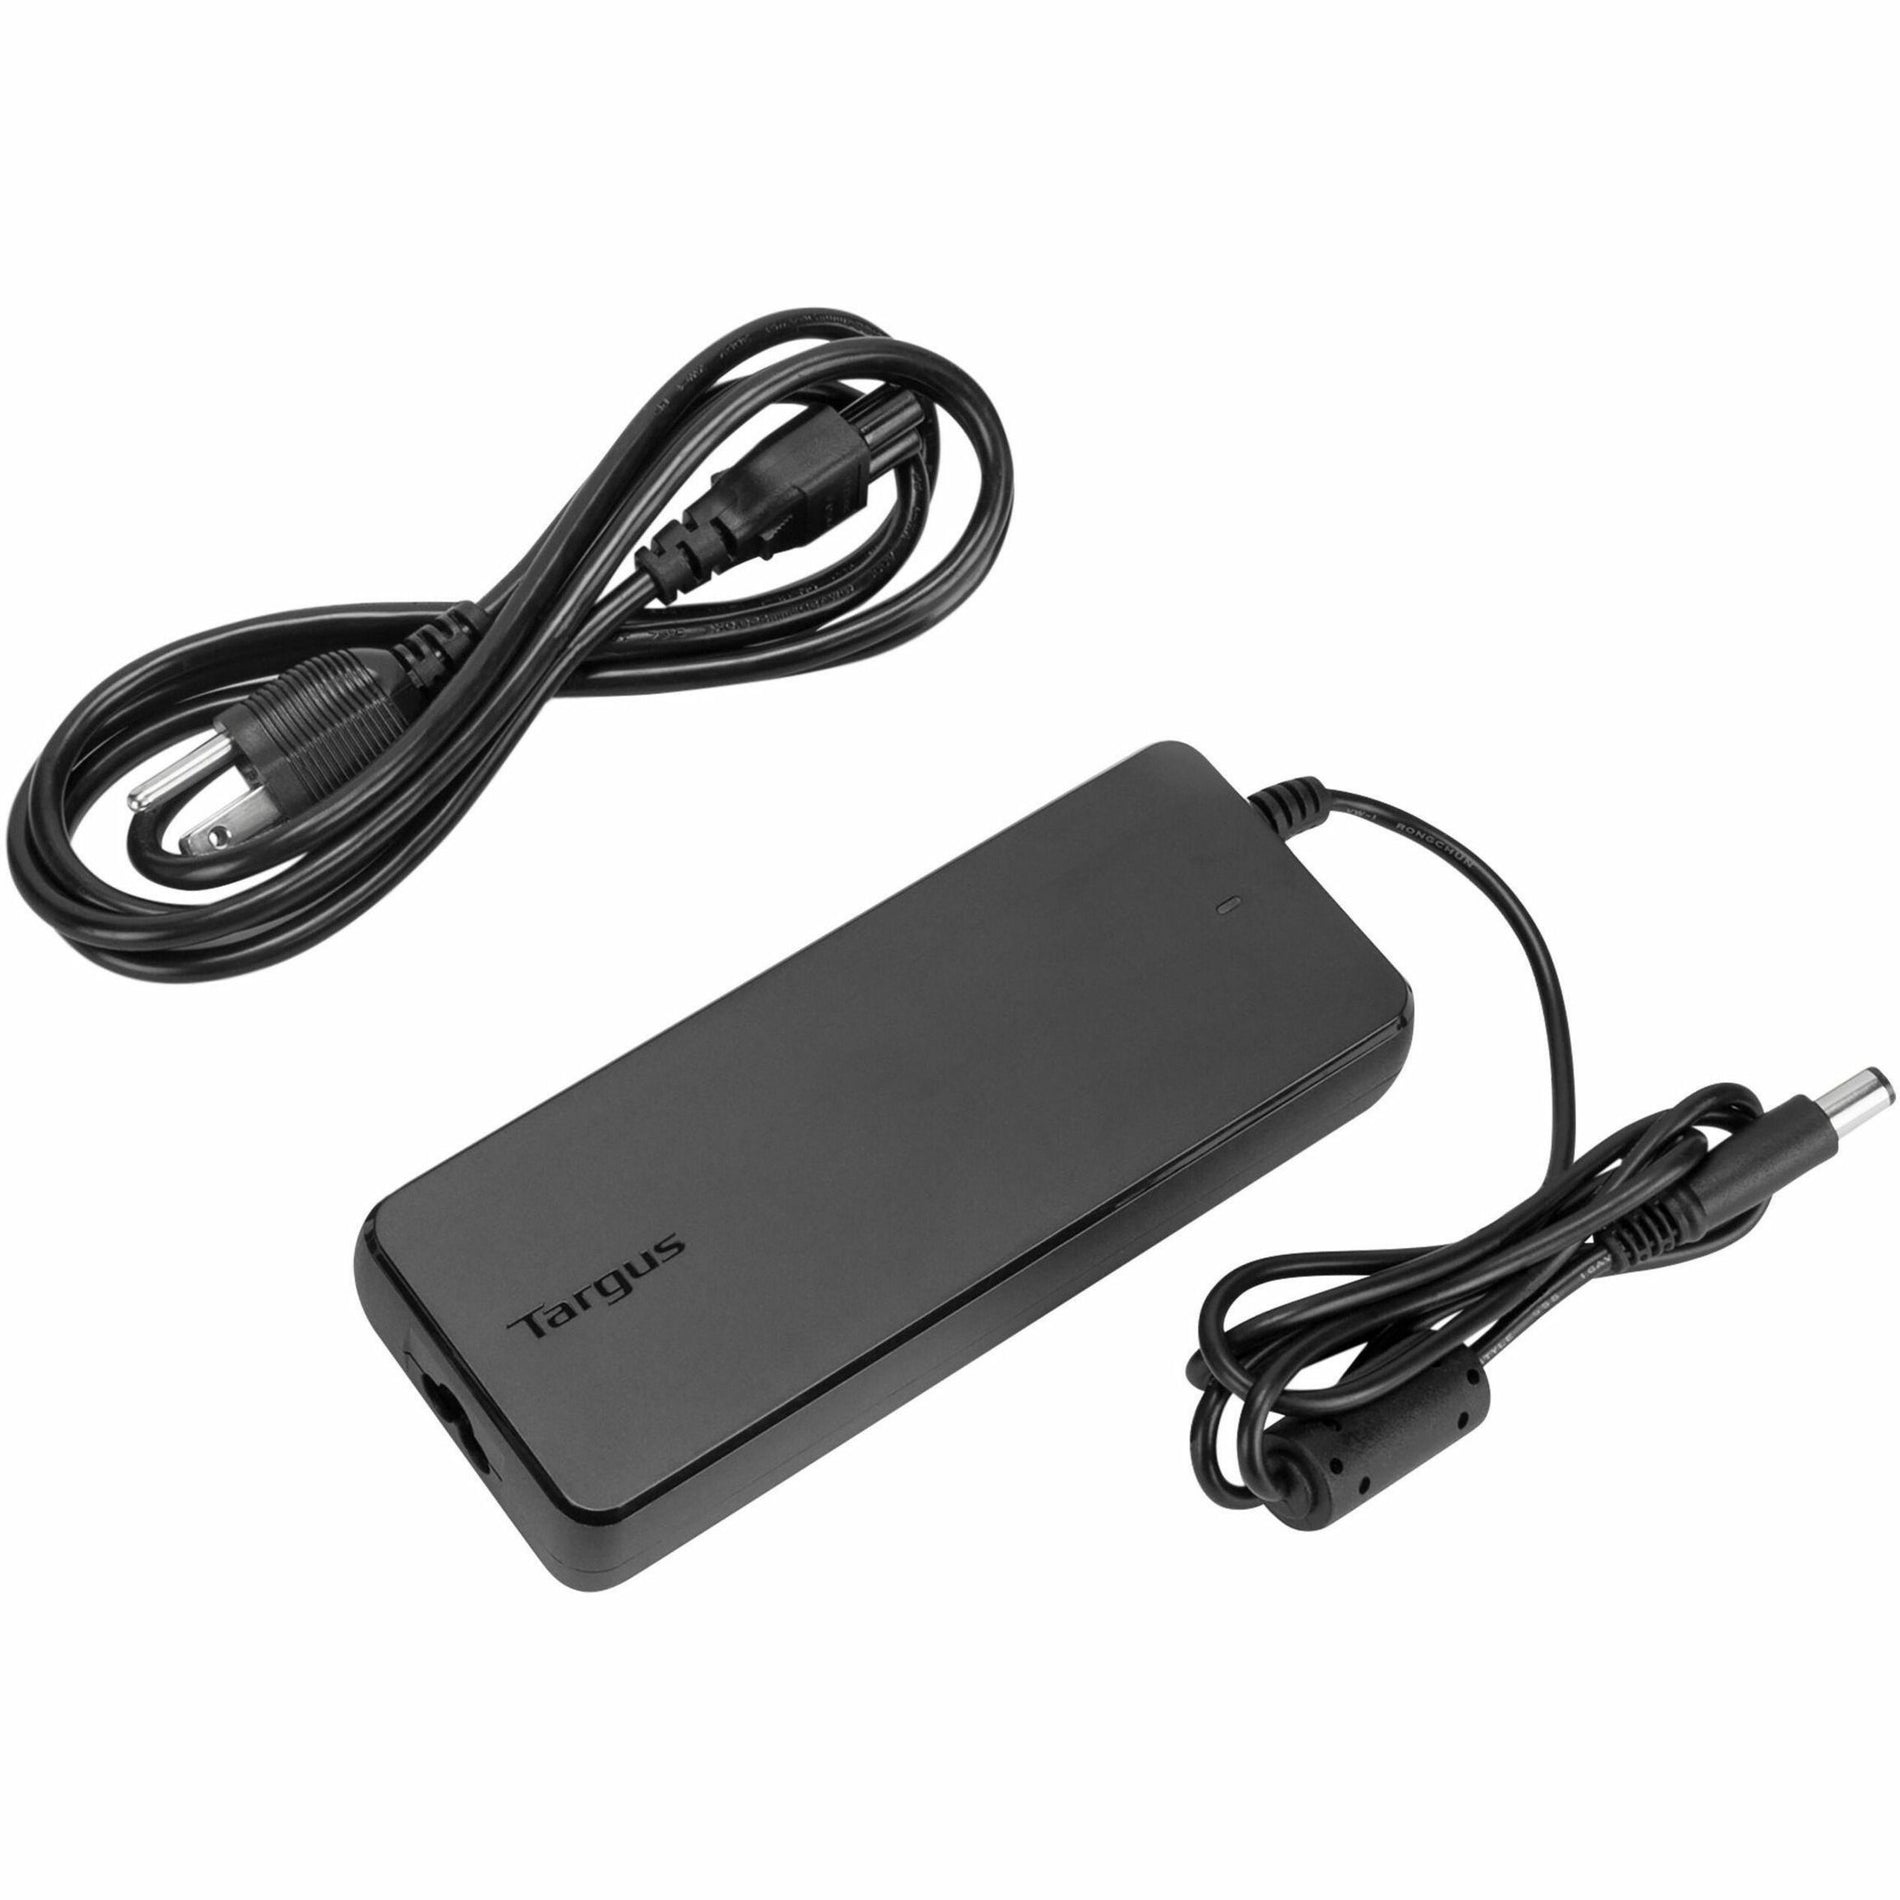 Targus BUS0415 AC/DC Adapter and AC Cable Cord Bundle for DOCK190, 150W Maximum Output Power, USB Type-C